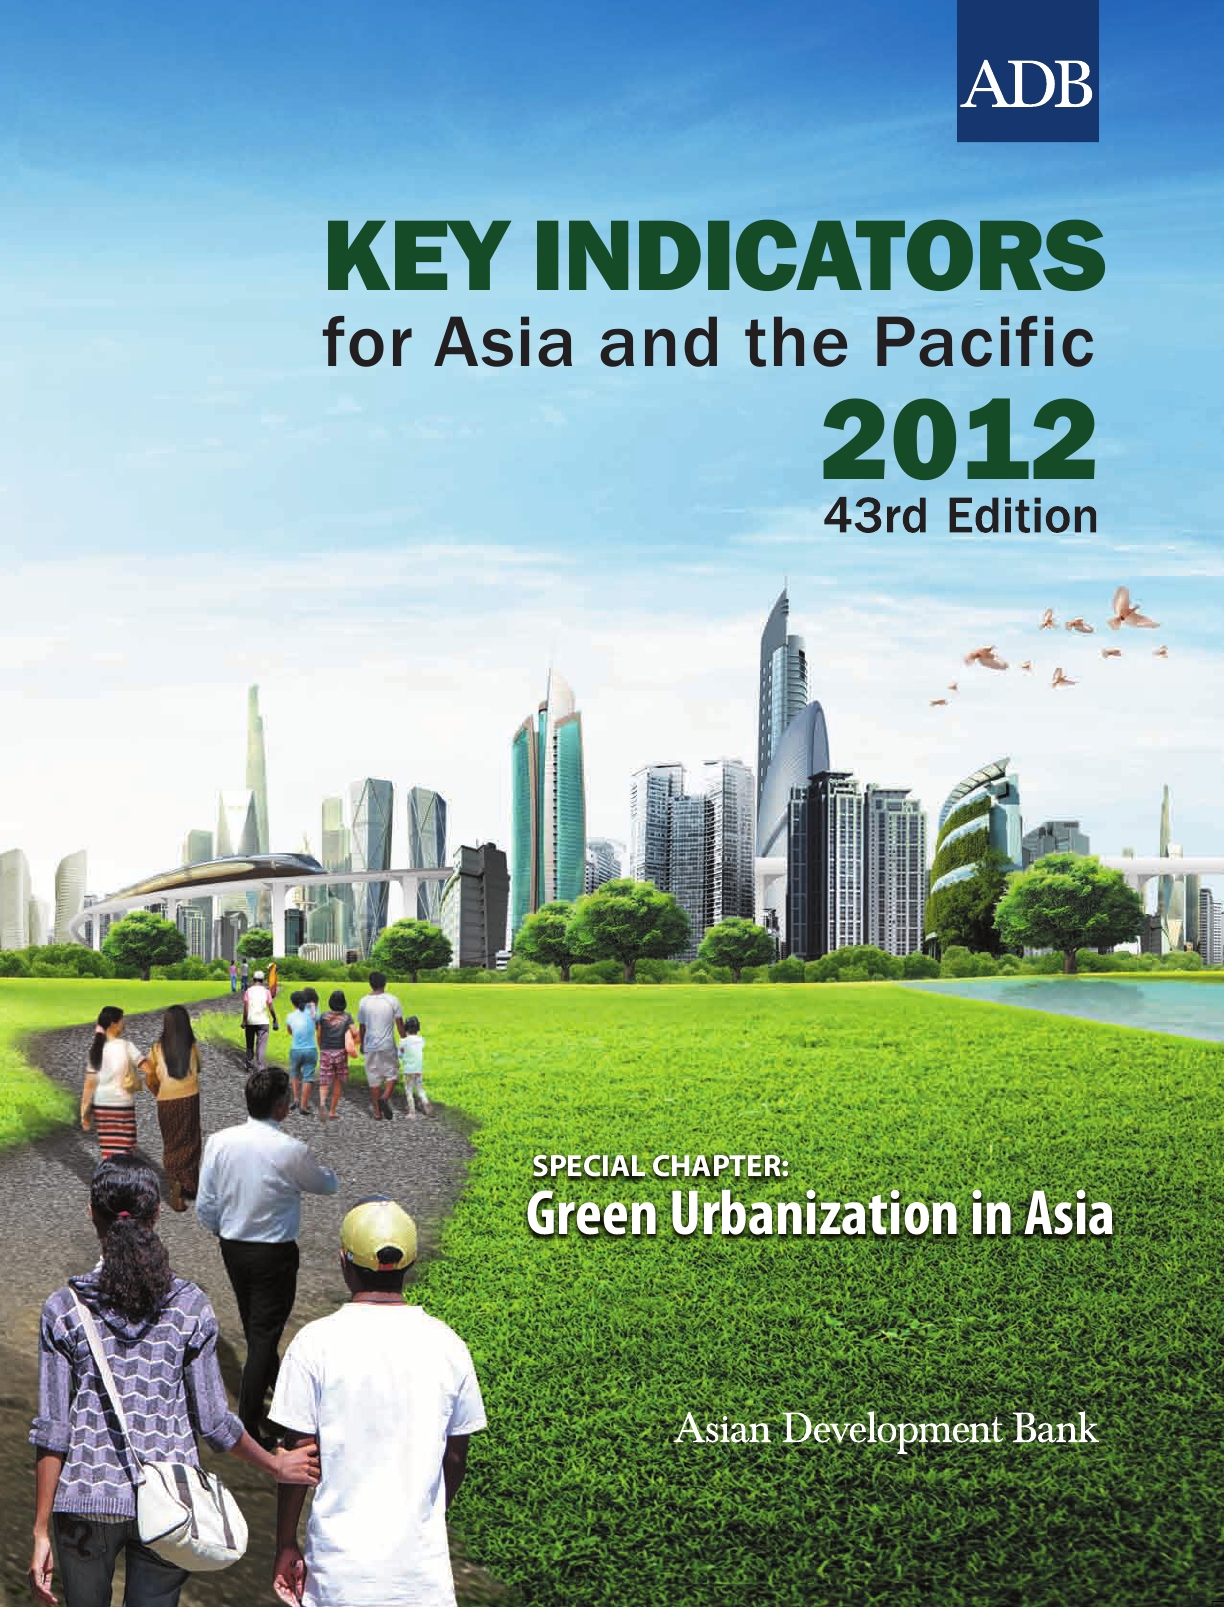 "The Key Indicators for Asia and the Pacific 2012 (Key Indicators), the 43rd edition of this series, includes the latest available economic, financial, social, and environmental indicators for the 48 regional members of the Asian Development Bank (ADB). This publication aims to present the latest key statistics on development issues concerning the economies of Asia and the Pacific to a wide audience, including policy makers, development practitioners, government officials, researchers, students, and the general public. Part I of this issue of the Key Indicators is a special chapter—Green Urbanization in Asia. Parts II and III comprise of brief, non-technical analyses and statistical tables on the Millennium Development Goals (MDGs) and seven other themes. This year, the second edition of the Framework of Inclusive Growth Indicators, a special supplement to Key Indicators is also included."